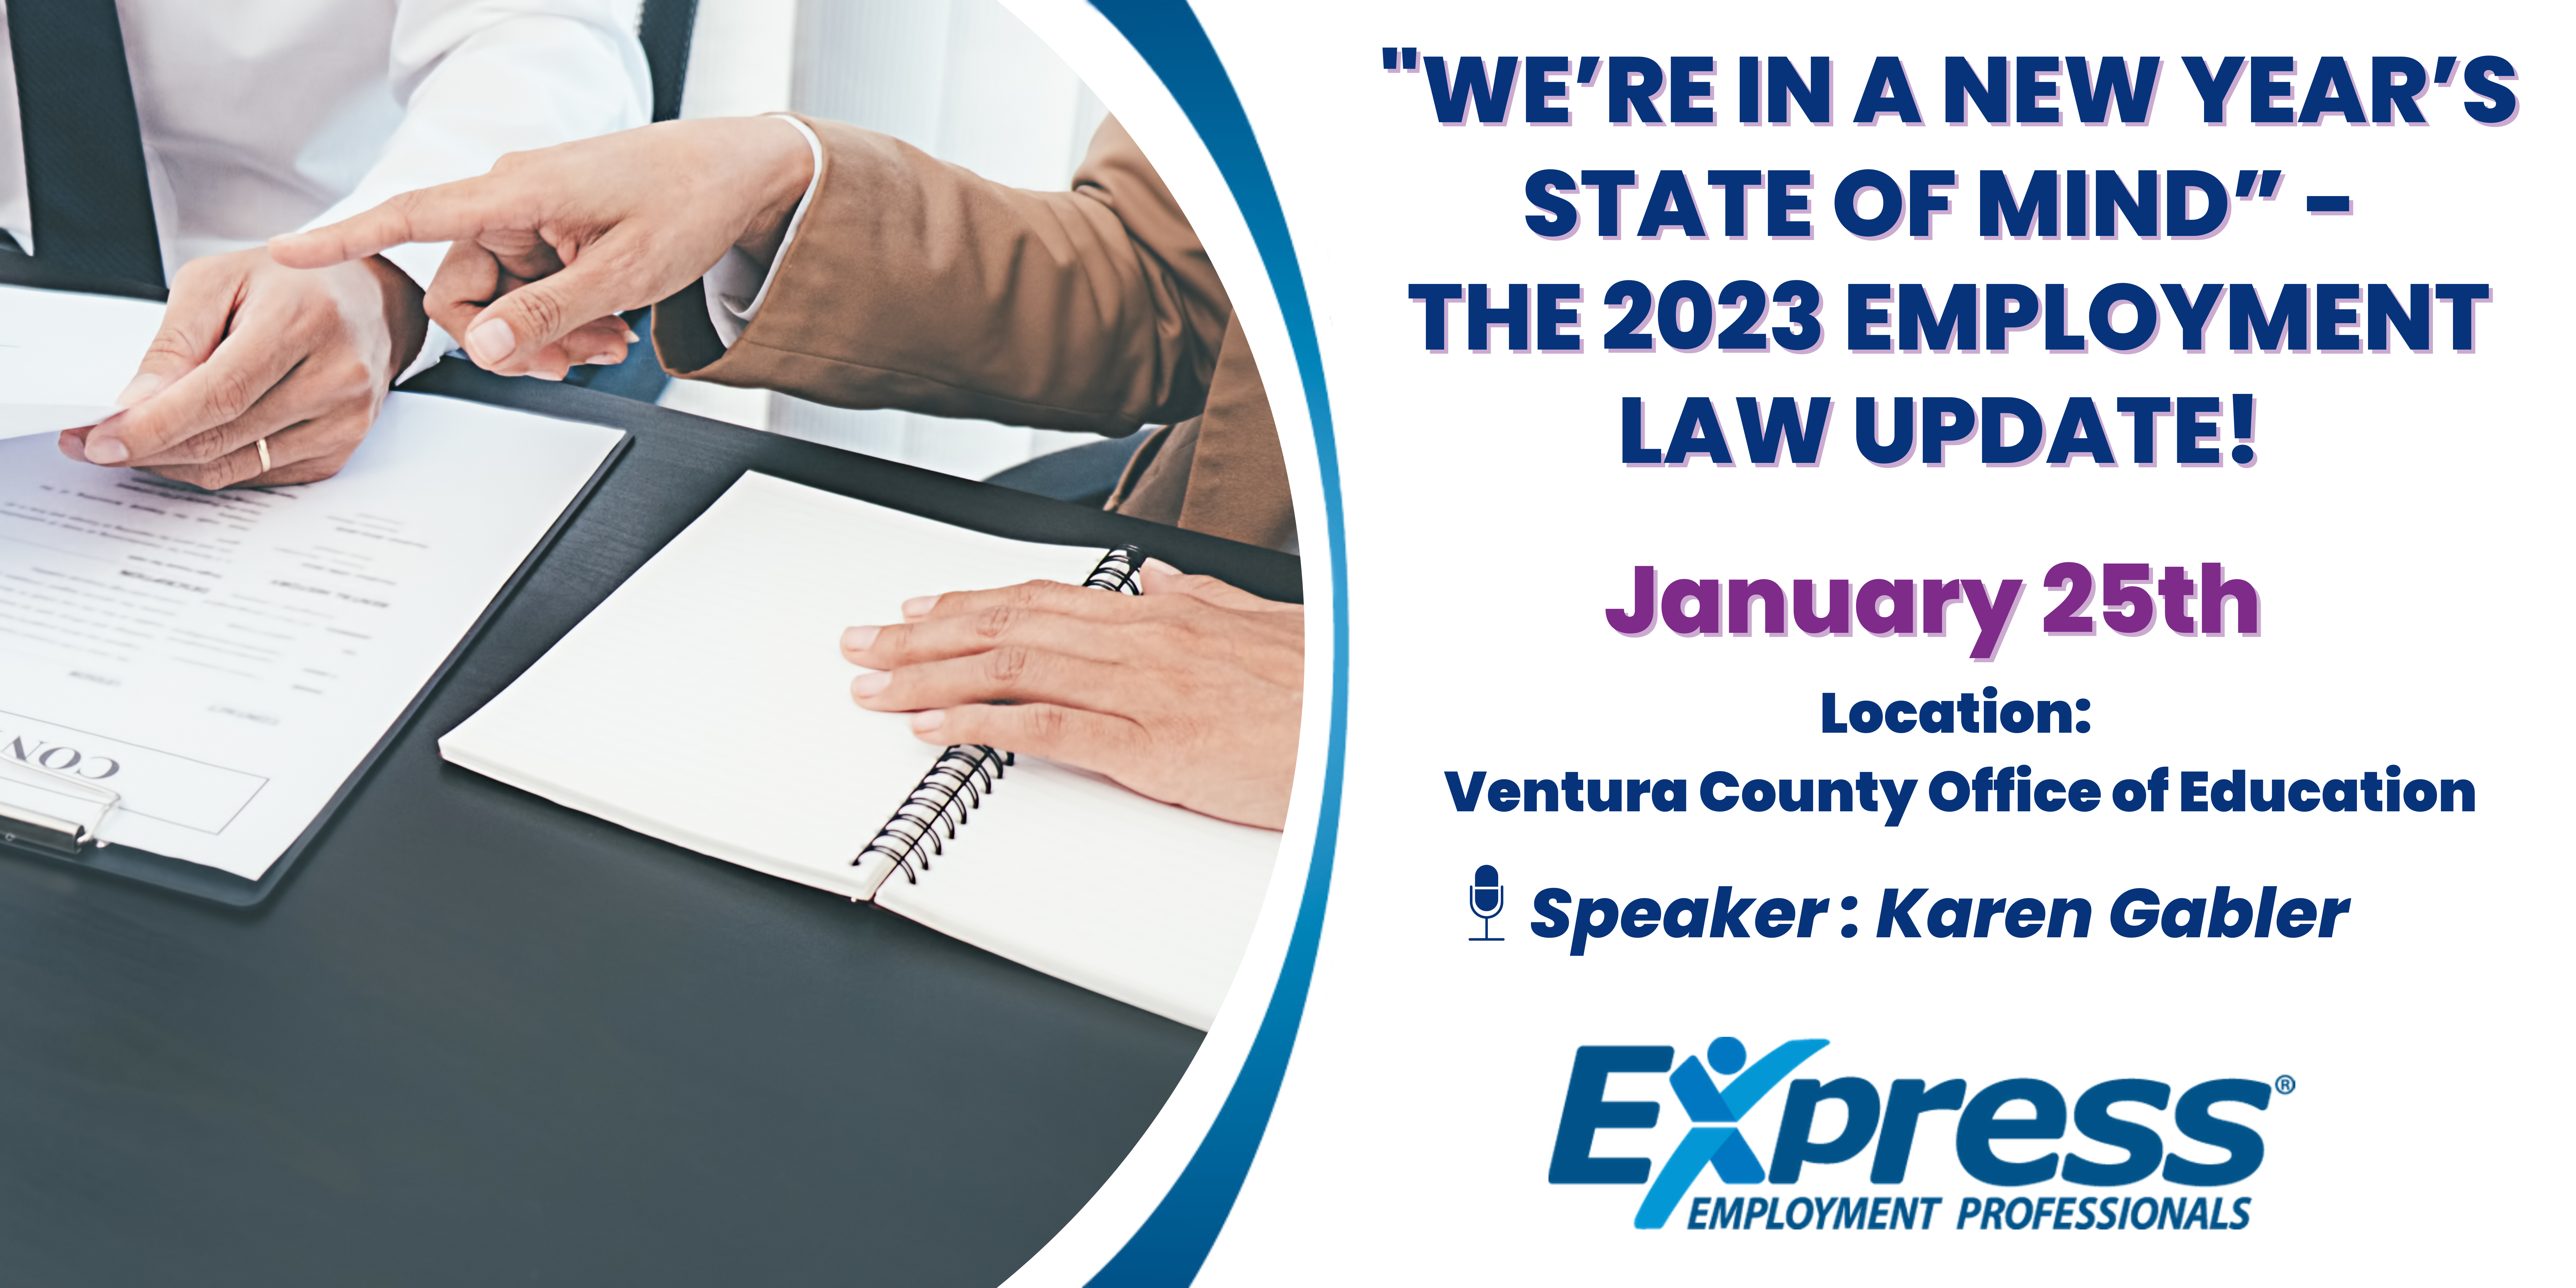 The 2023 Employment Law Update - Ventura County Staffing